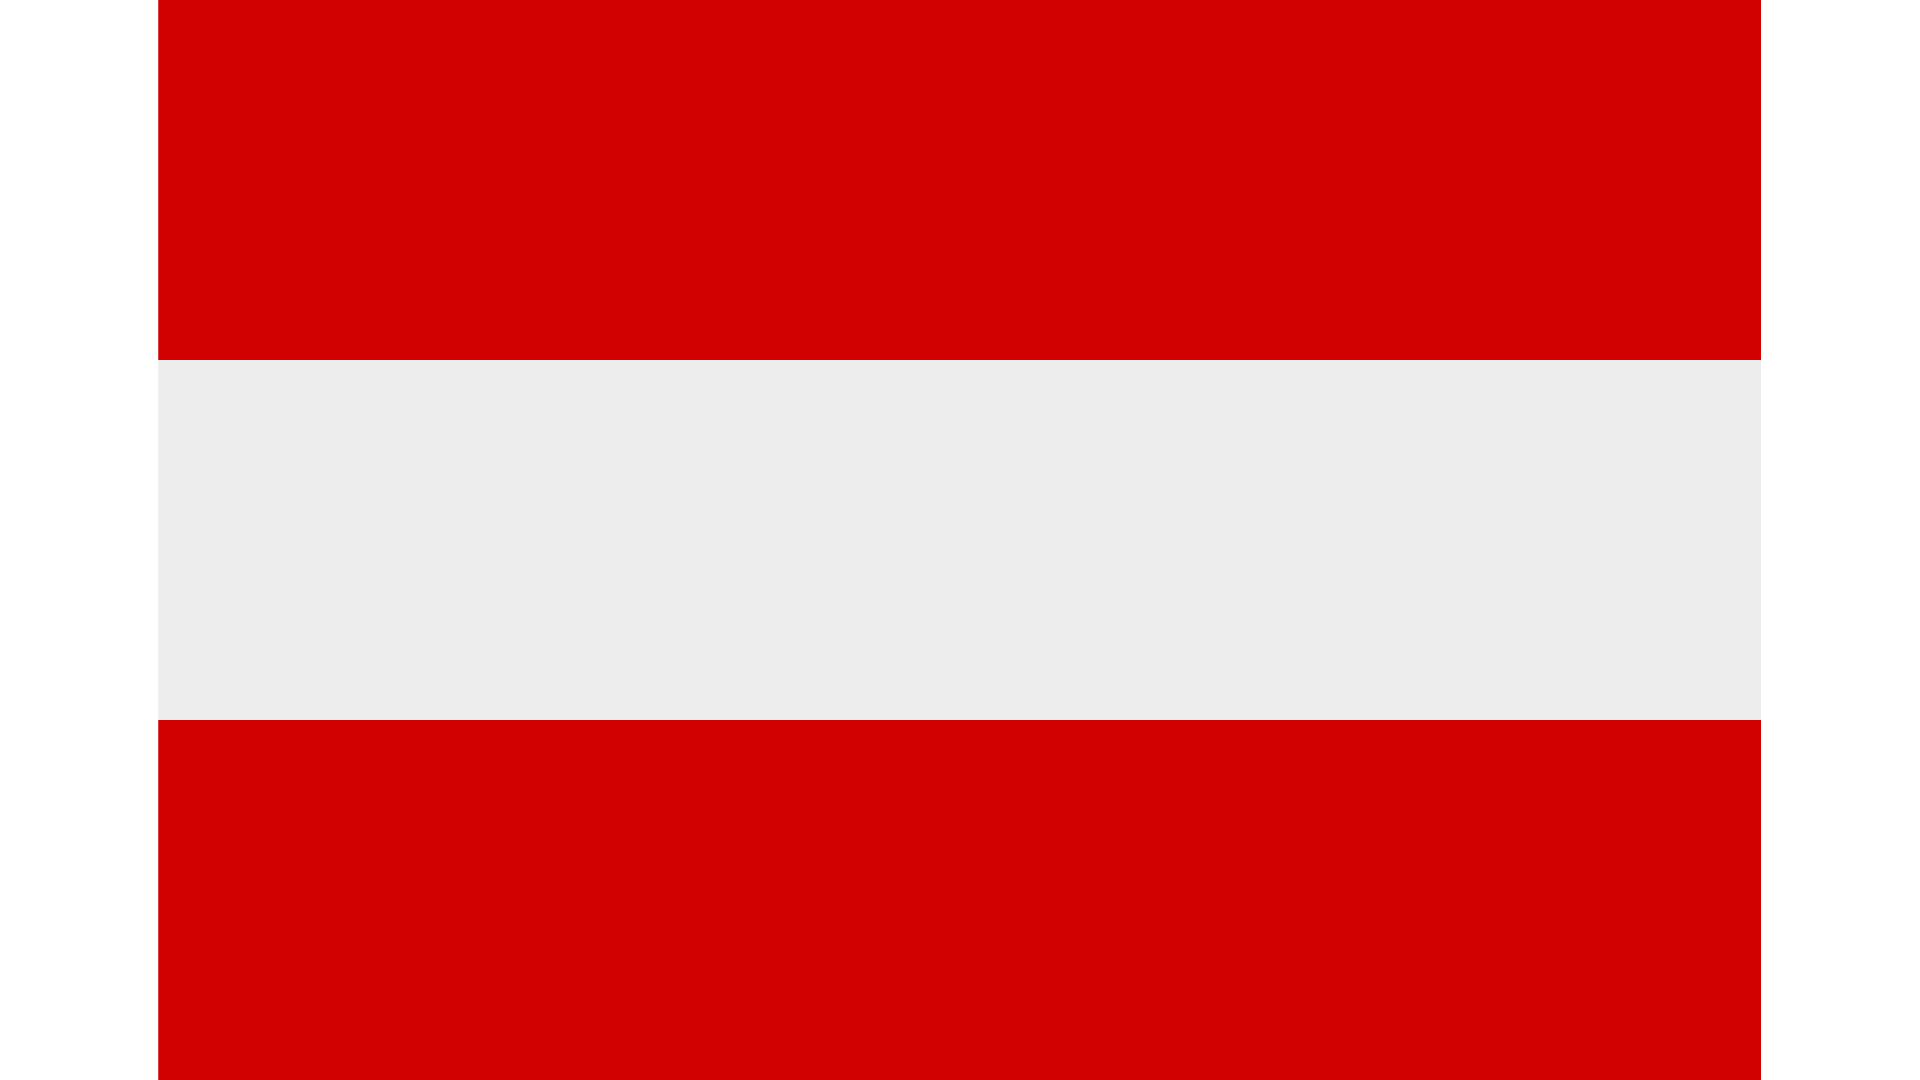 The flag of Austria with two red and one strip horizontally.